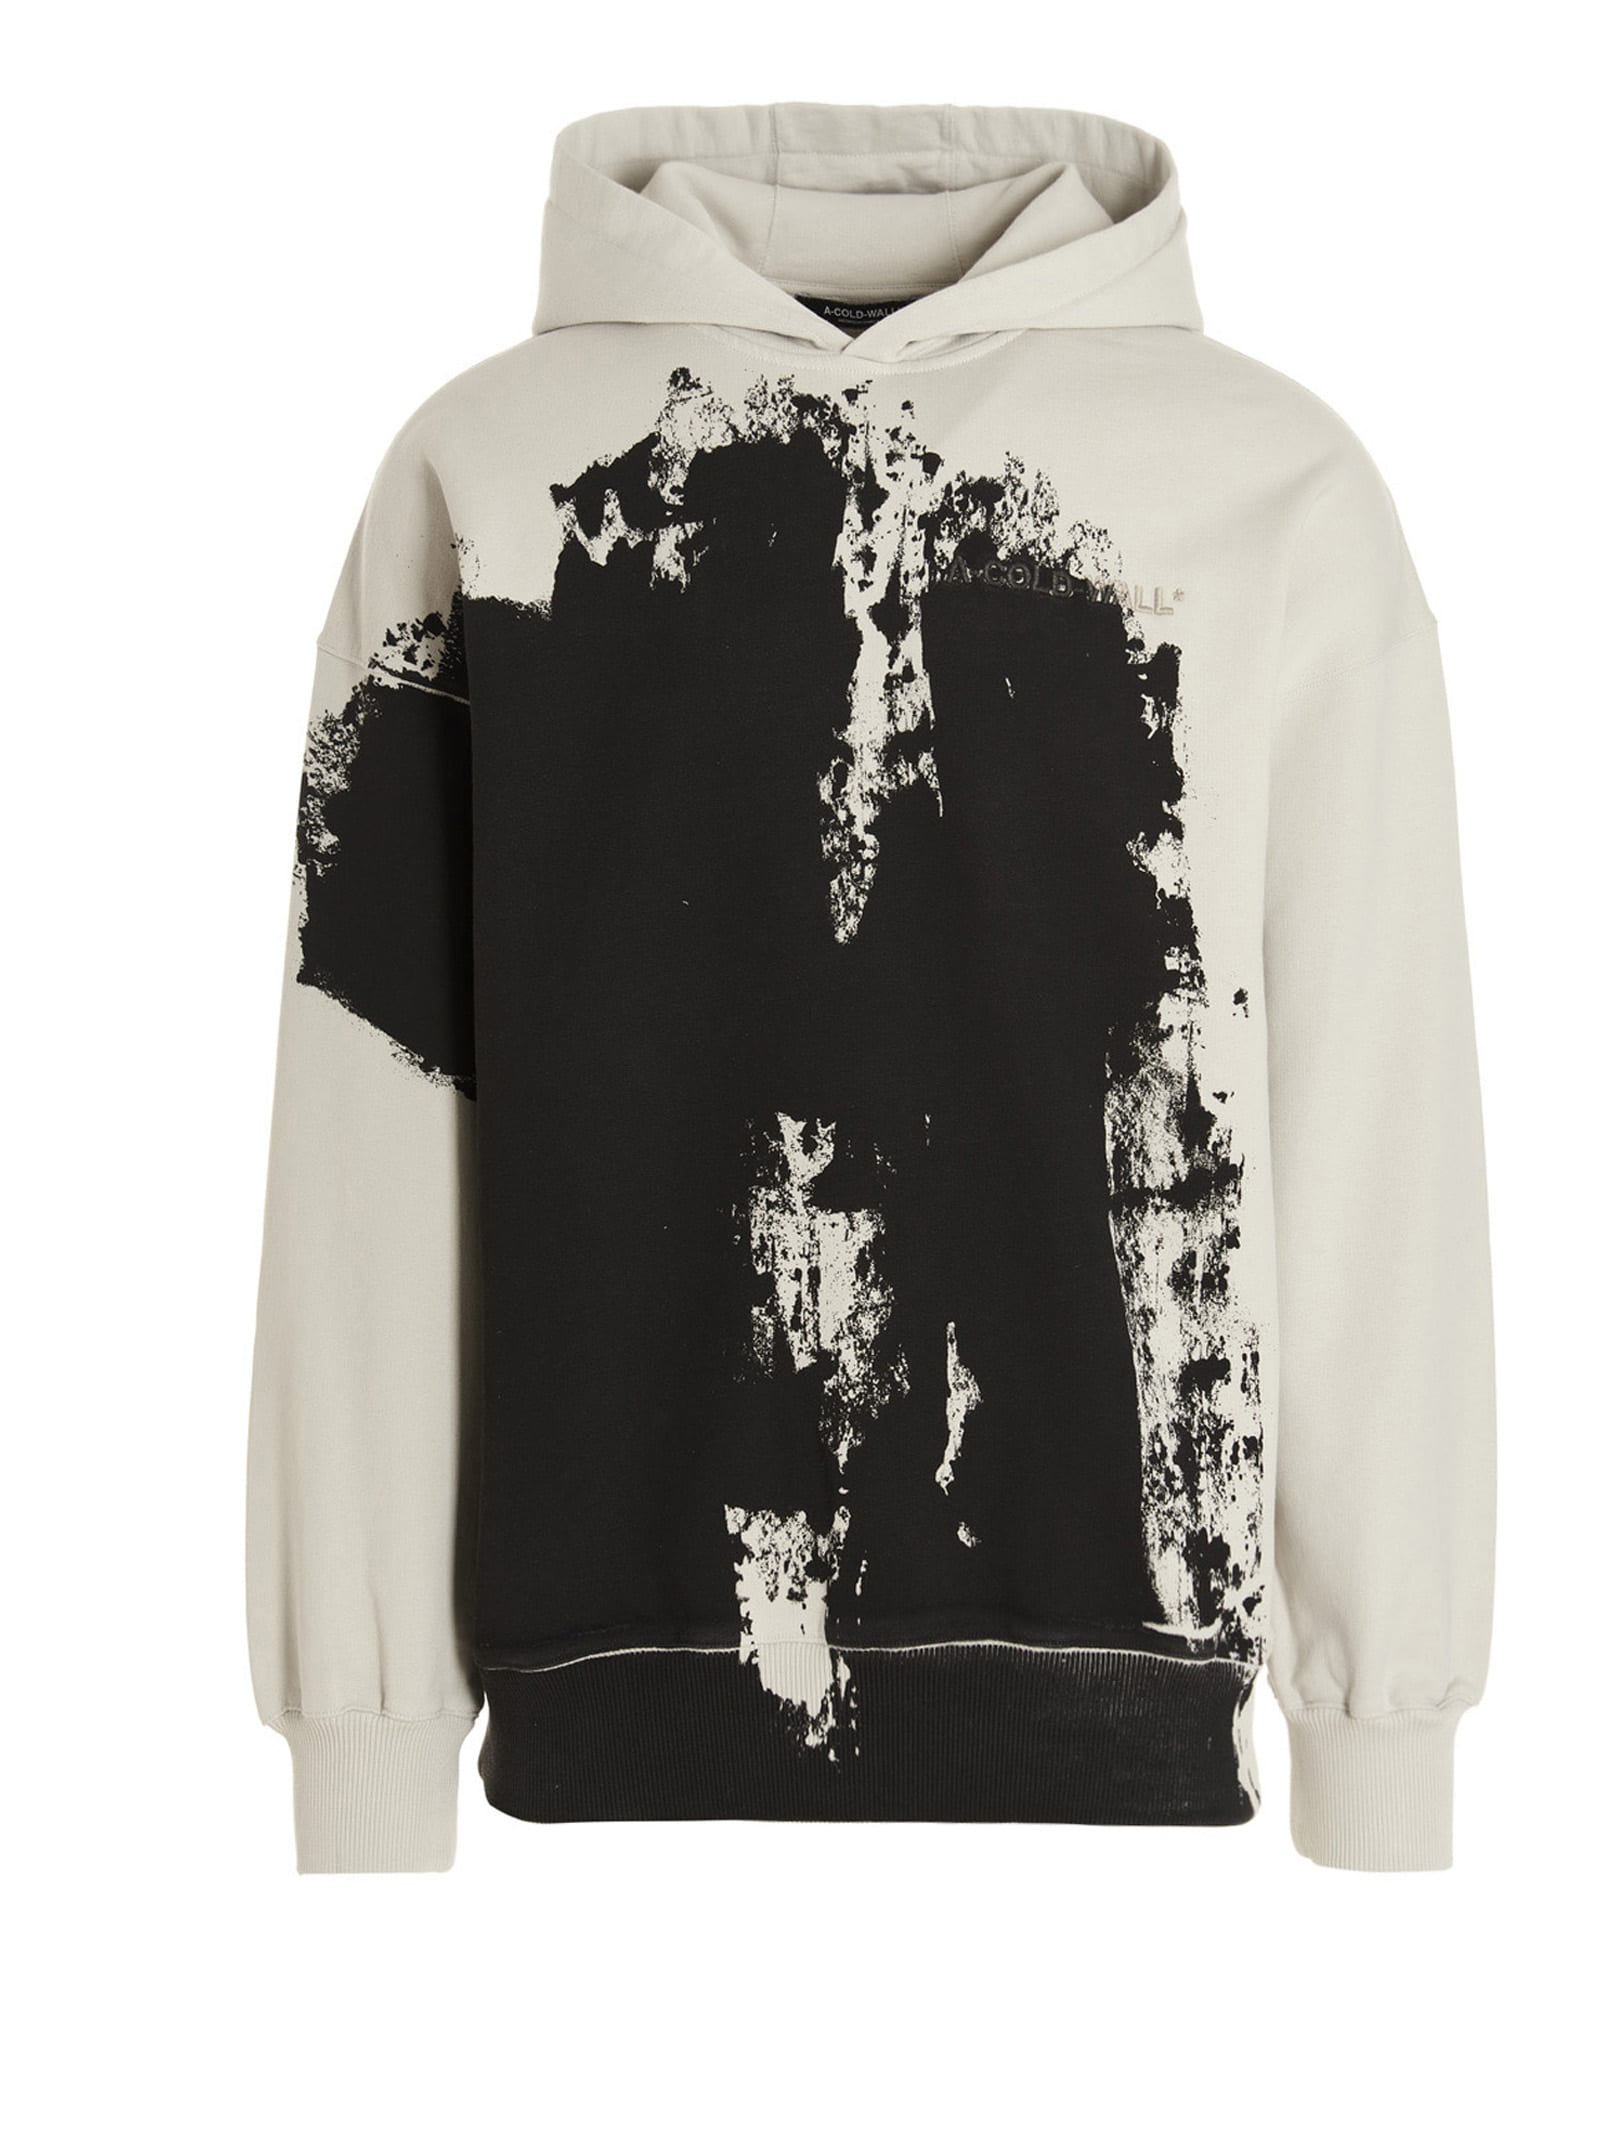 A-COLD-WALL relaxed Studio Hoodie